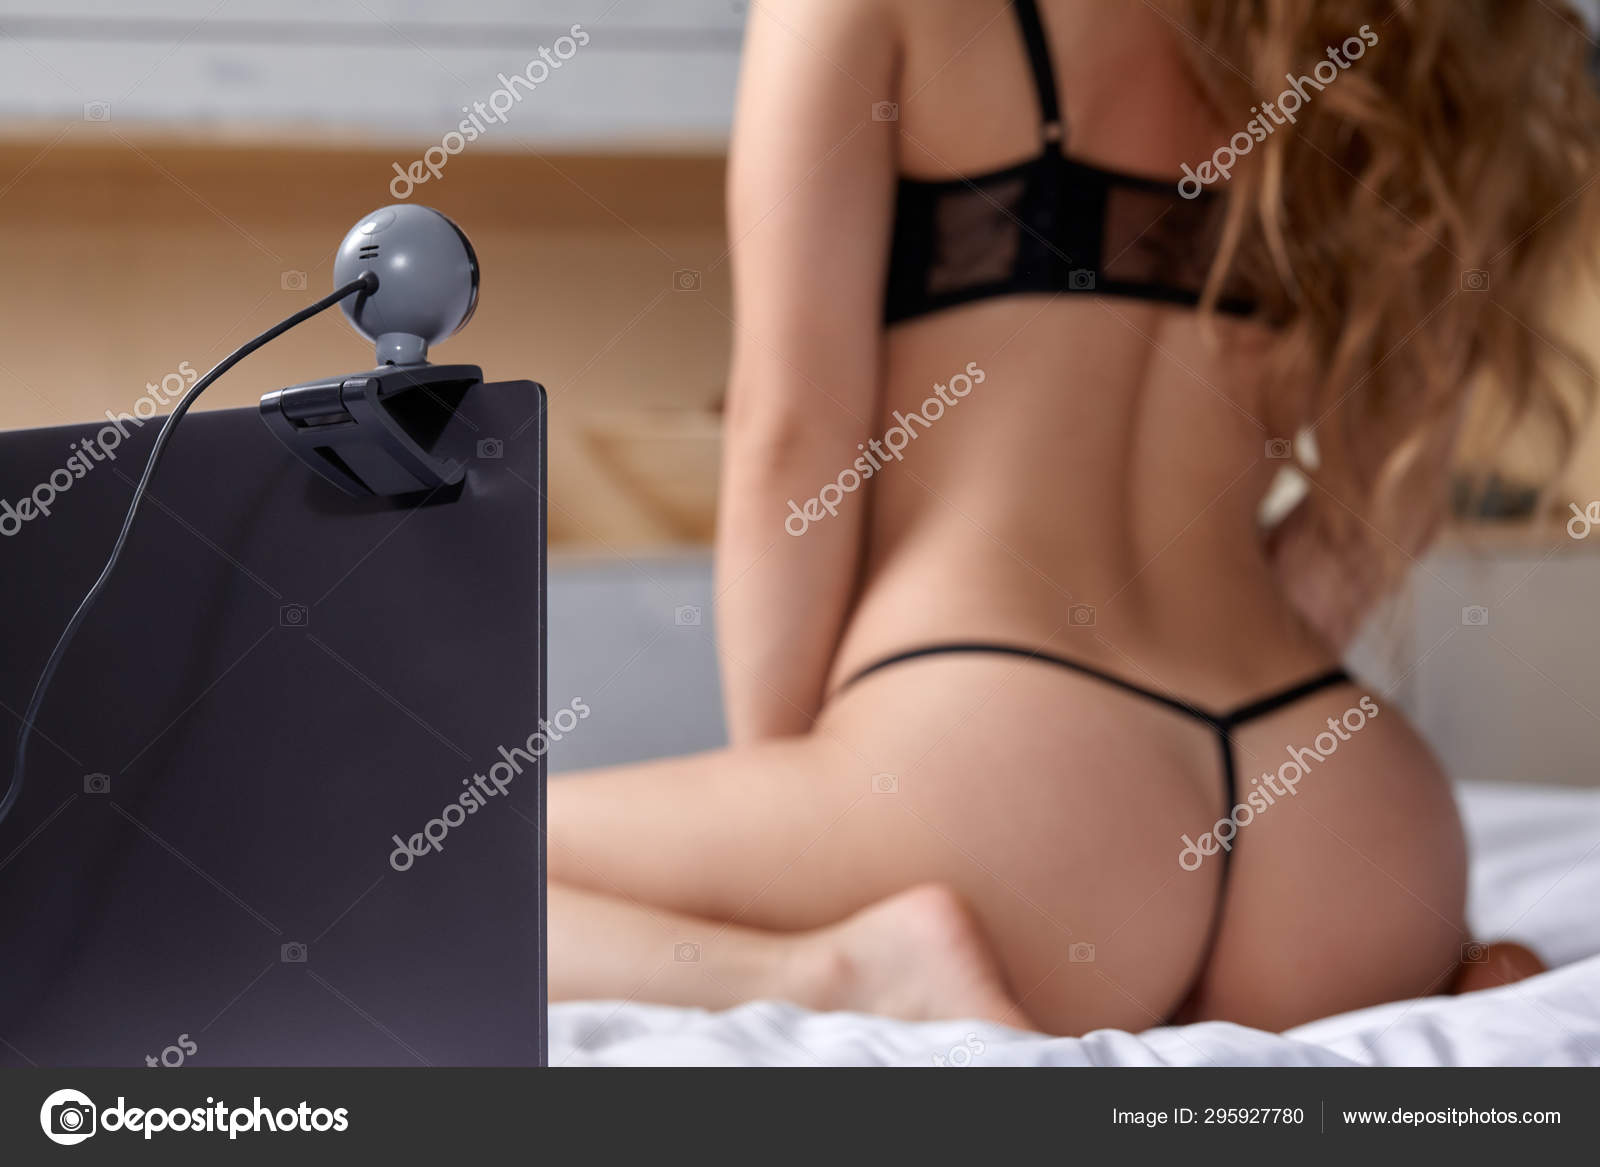 Beautiful, young girl posing in front of a web camera, working as a model. He takes off his